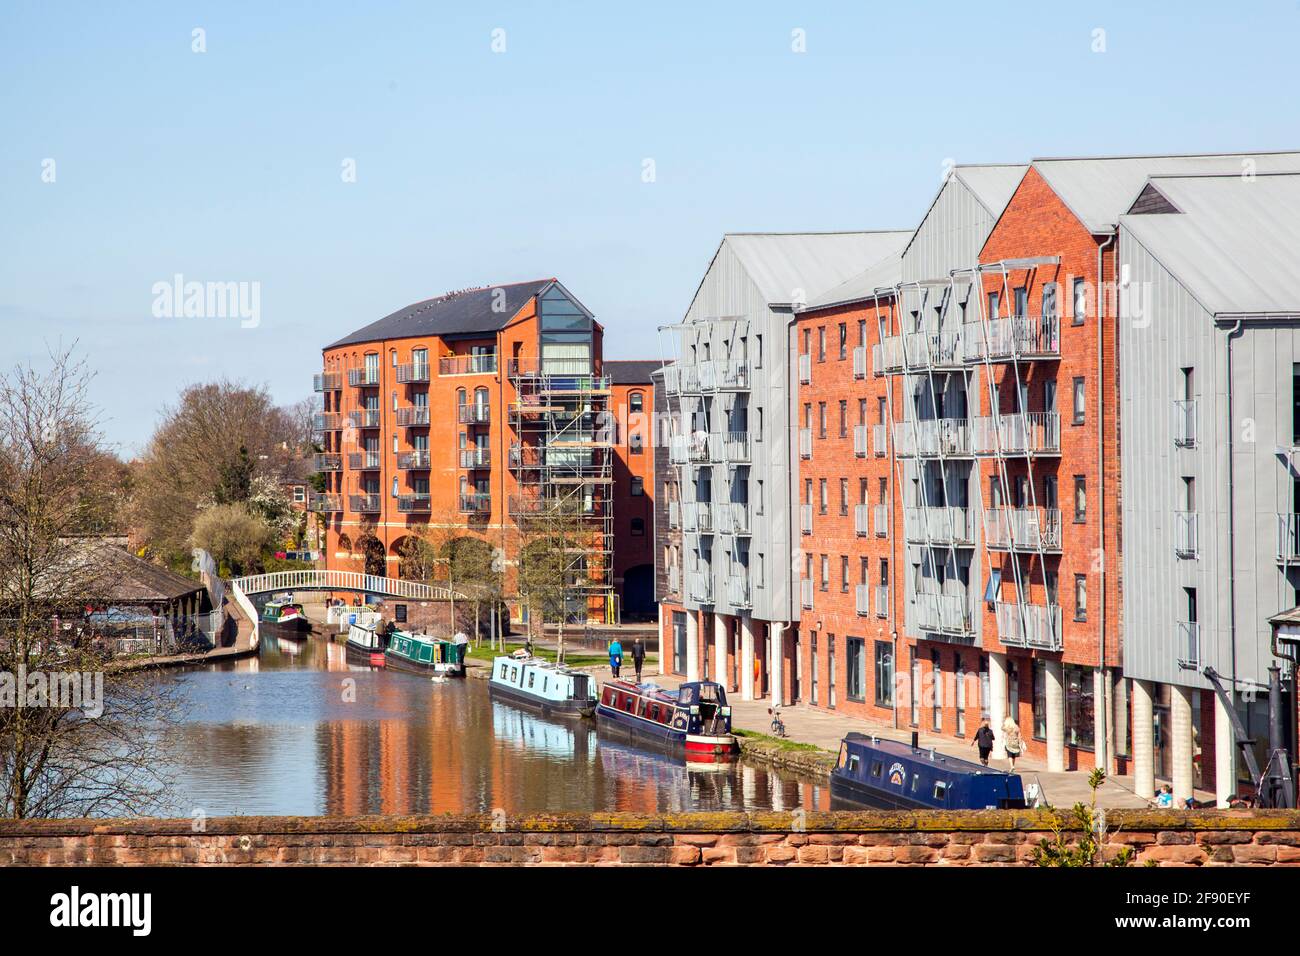 Canal side apartments and narrowboats on the Shropshire union canal as it passes through the Cheshire city of Chester England Stock Photo